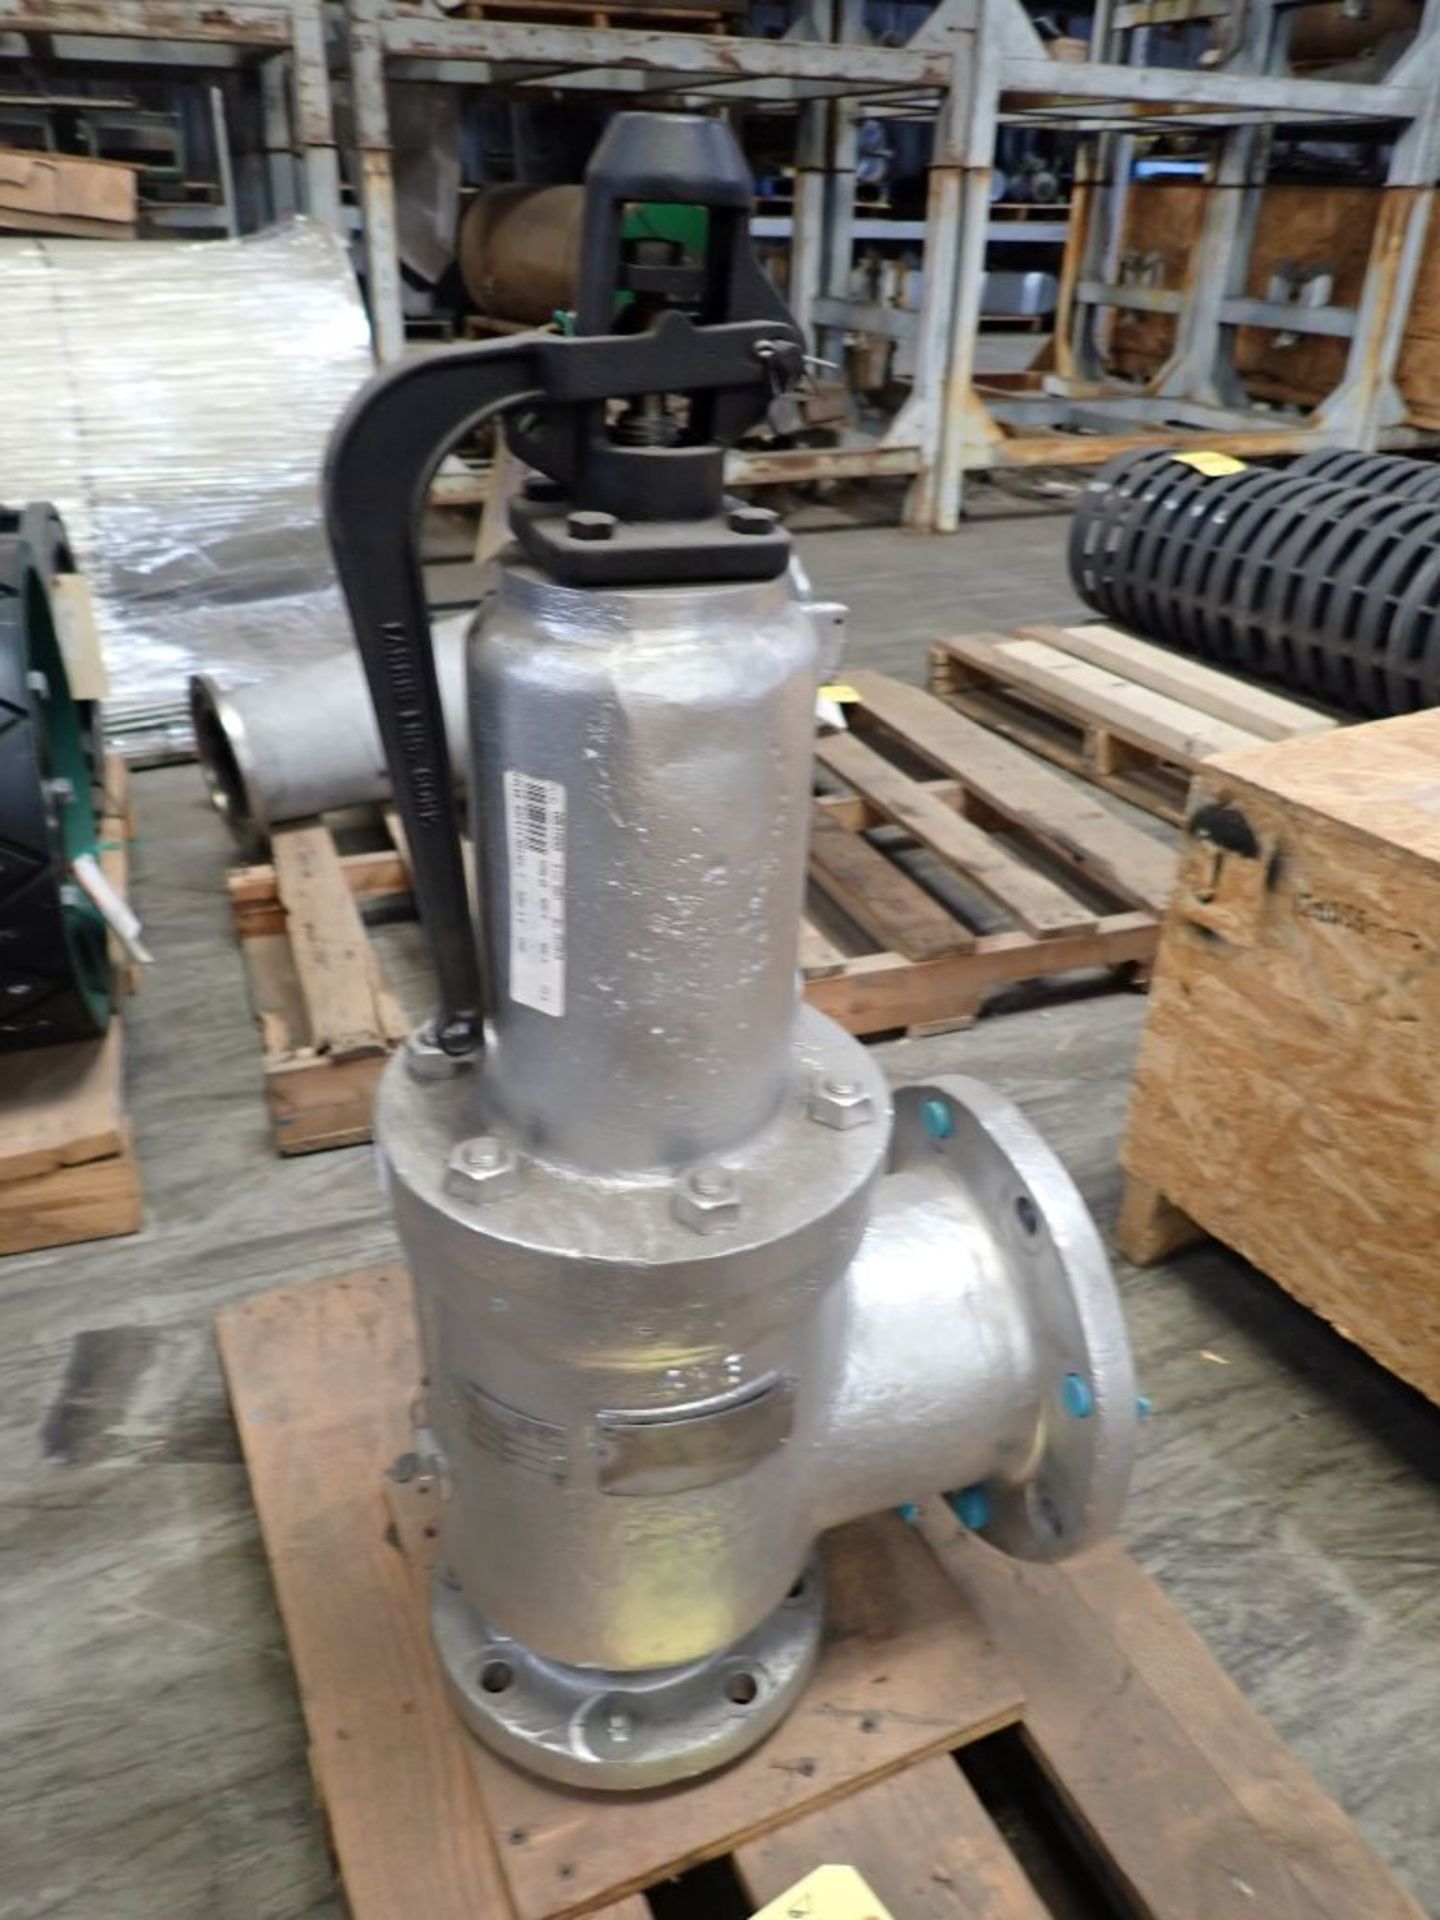 Farris Safety Relief Valve | Model No. 26PA10-170SP; 4" - 300 x 6" - 150; Tag: 232291 - Image 2 of 5